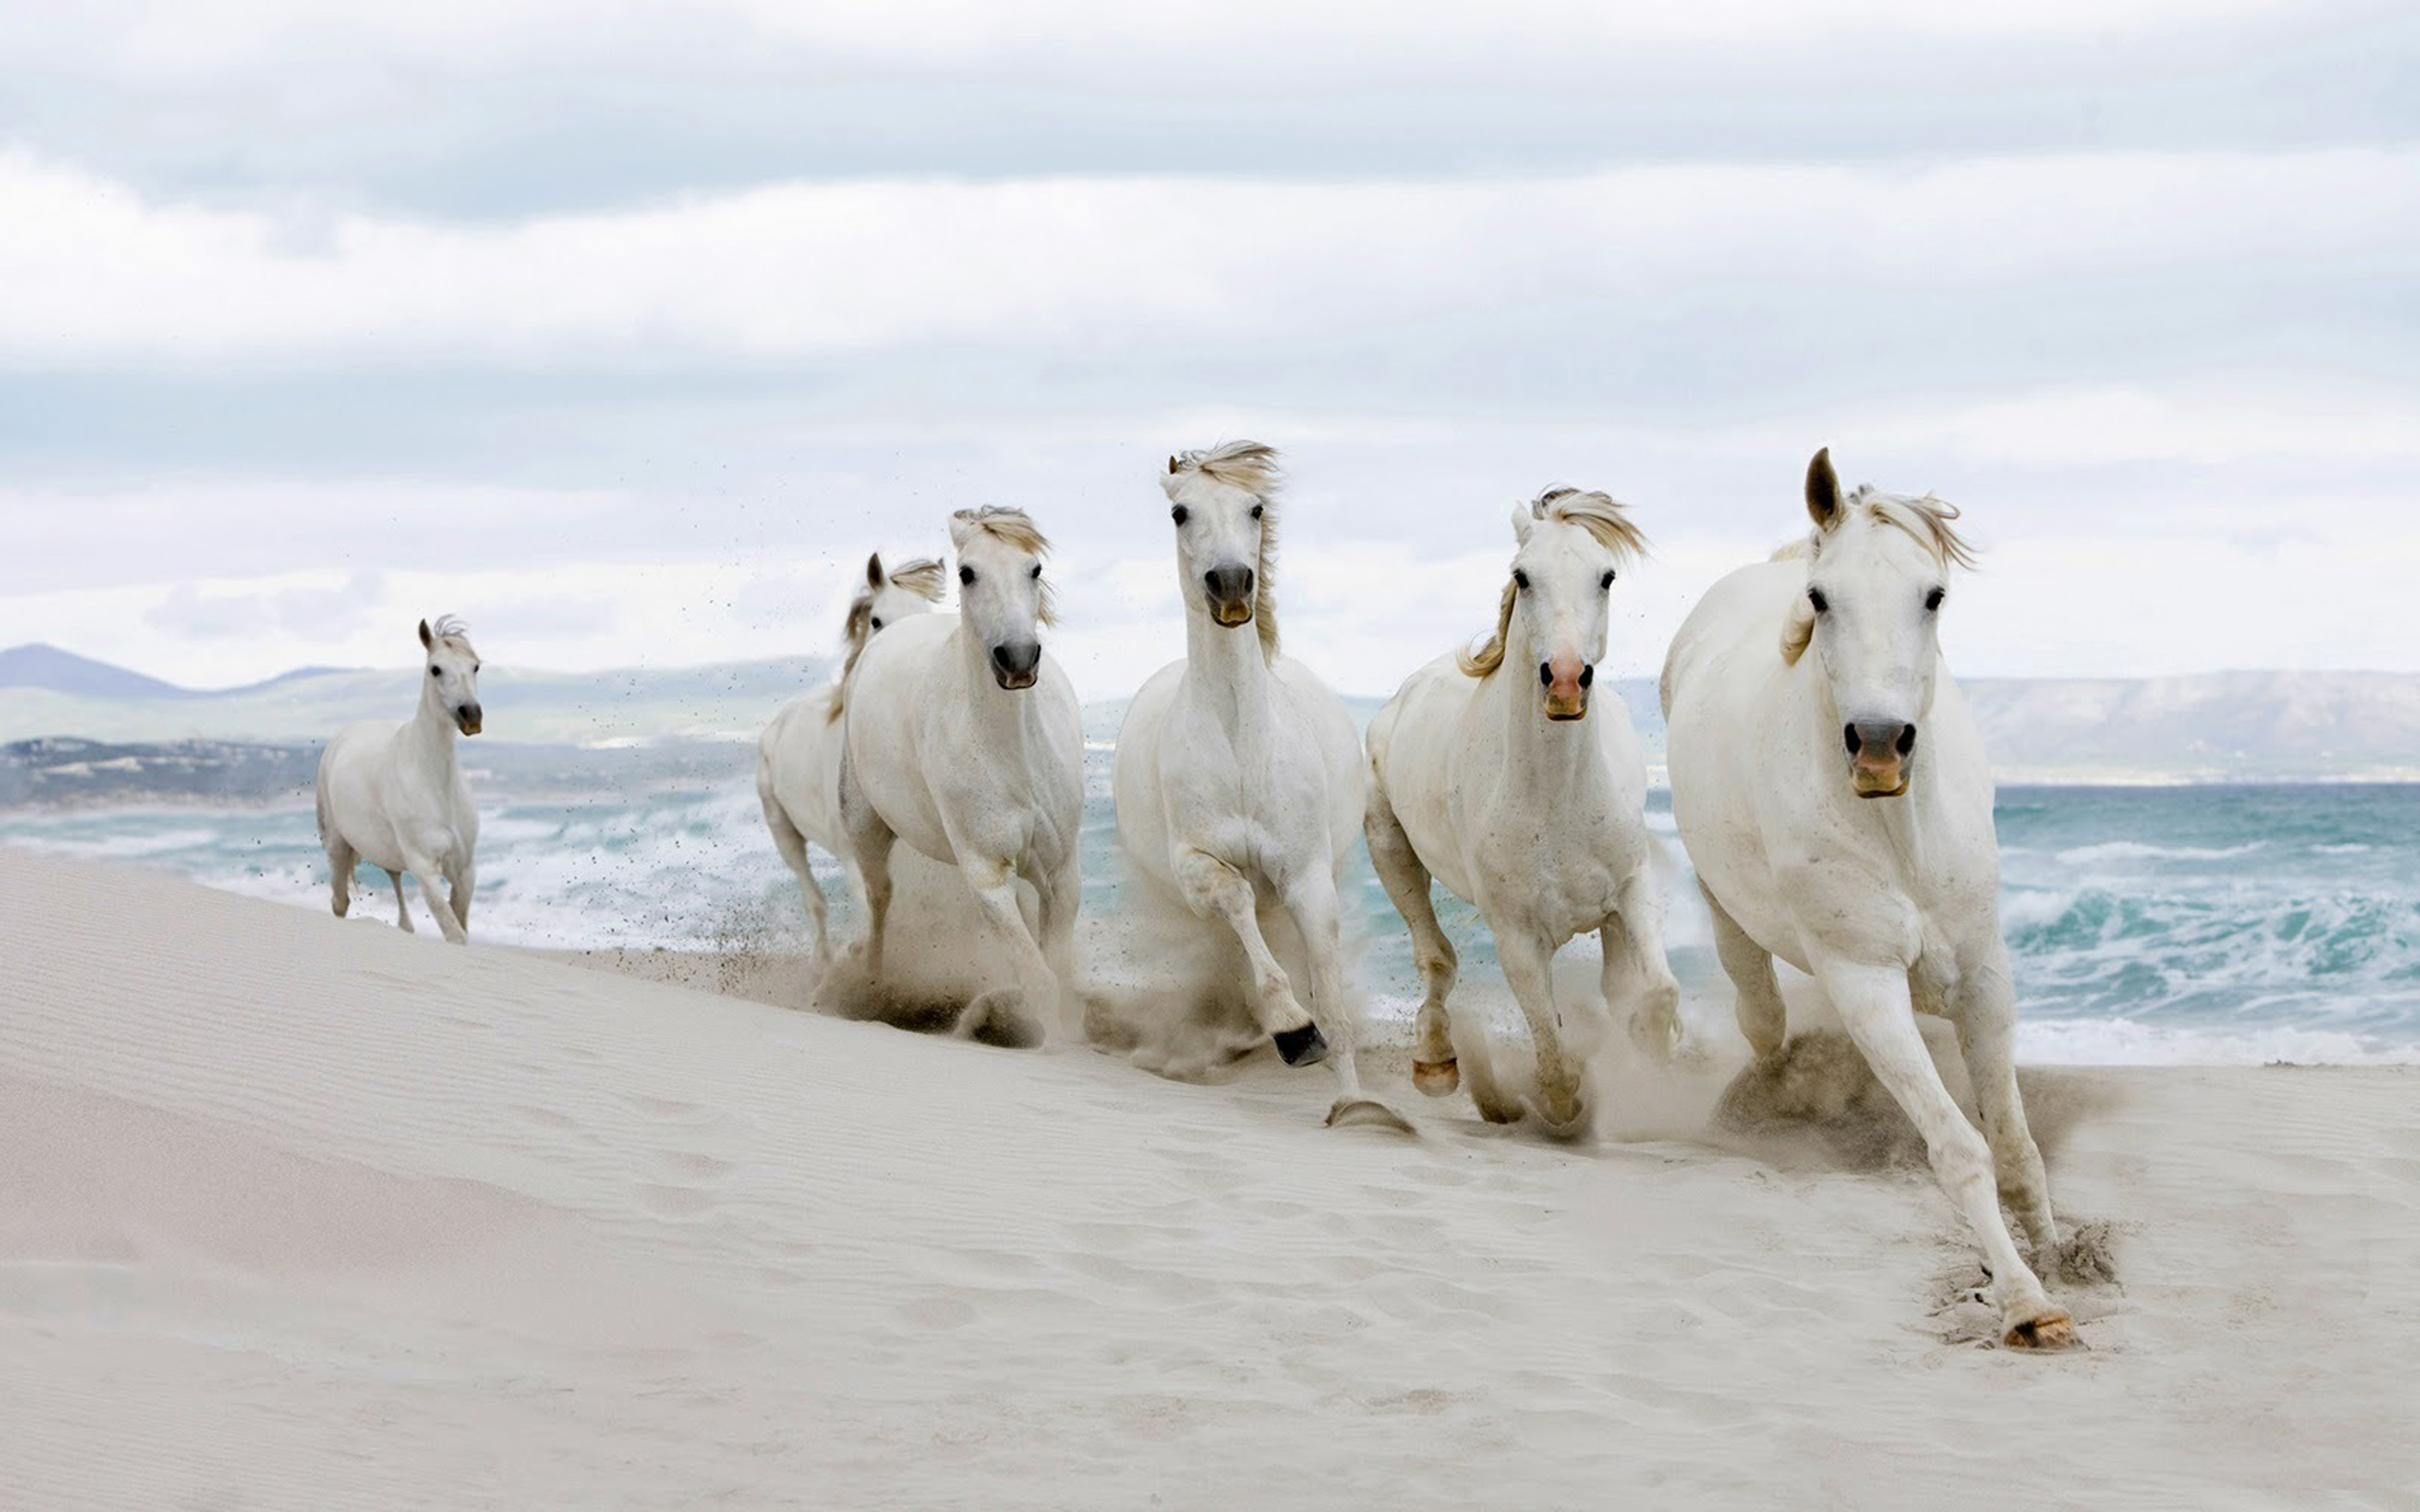 White Wild Horses The Sea Beach Hd Wallpapers : Wallpapers13.com